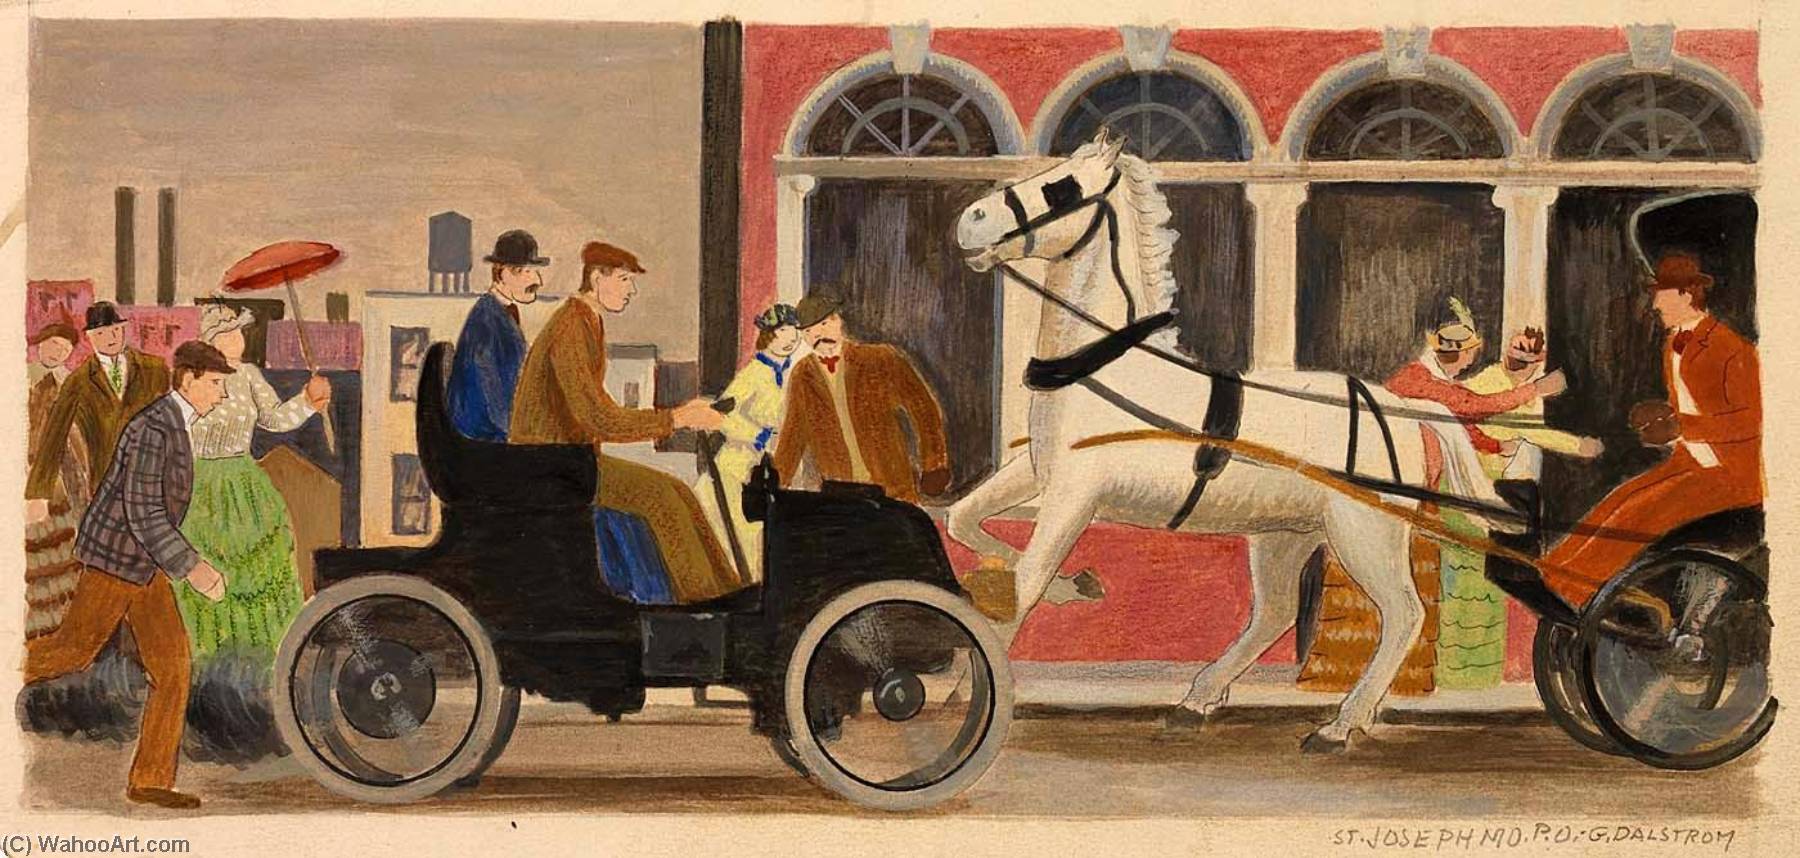 Wikioo.org - สารานุกรมวิจิตรศิลป์ - จิตรกรรม Gustaf Oscar Dalström - Horseless Carriage (mural study, St. Joseph, Missouri Post Office and Courthouse)